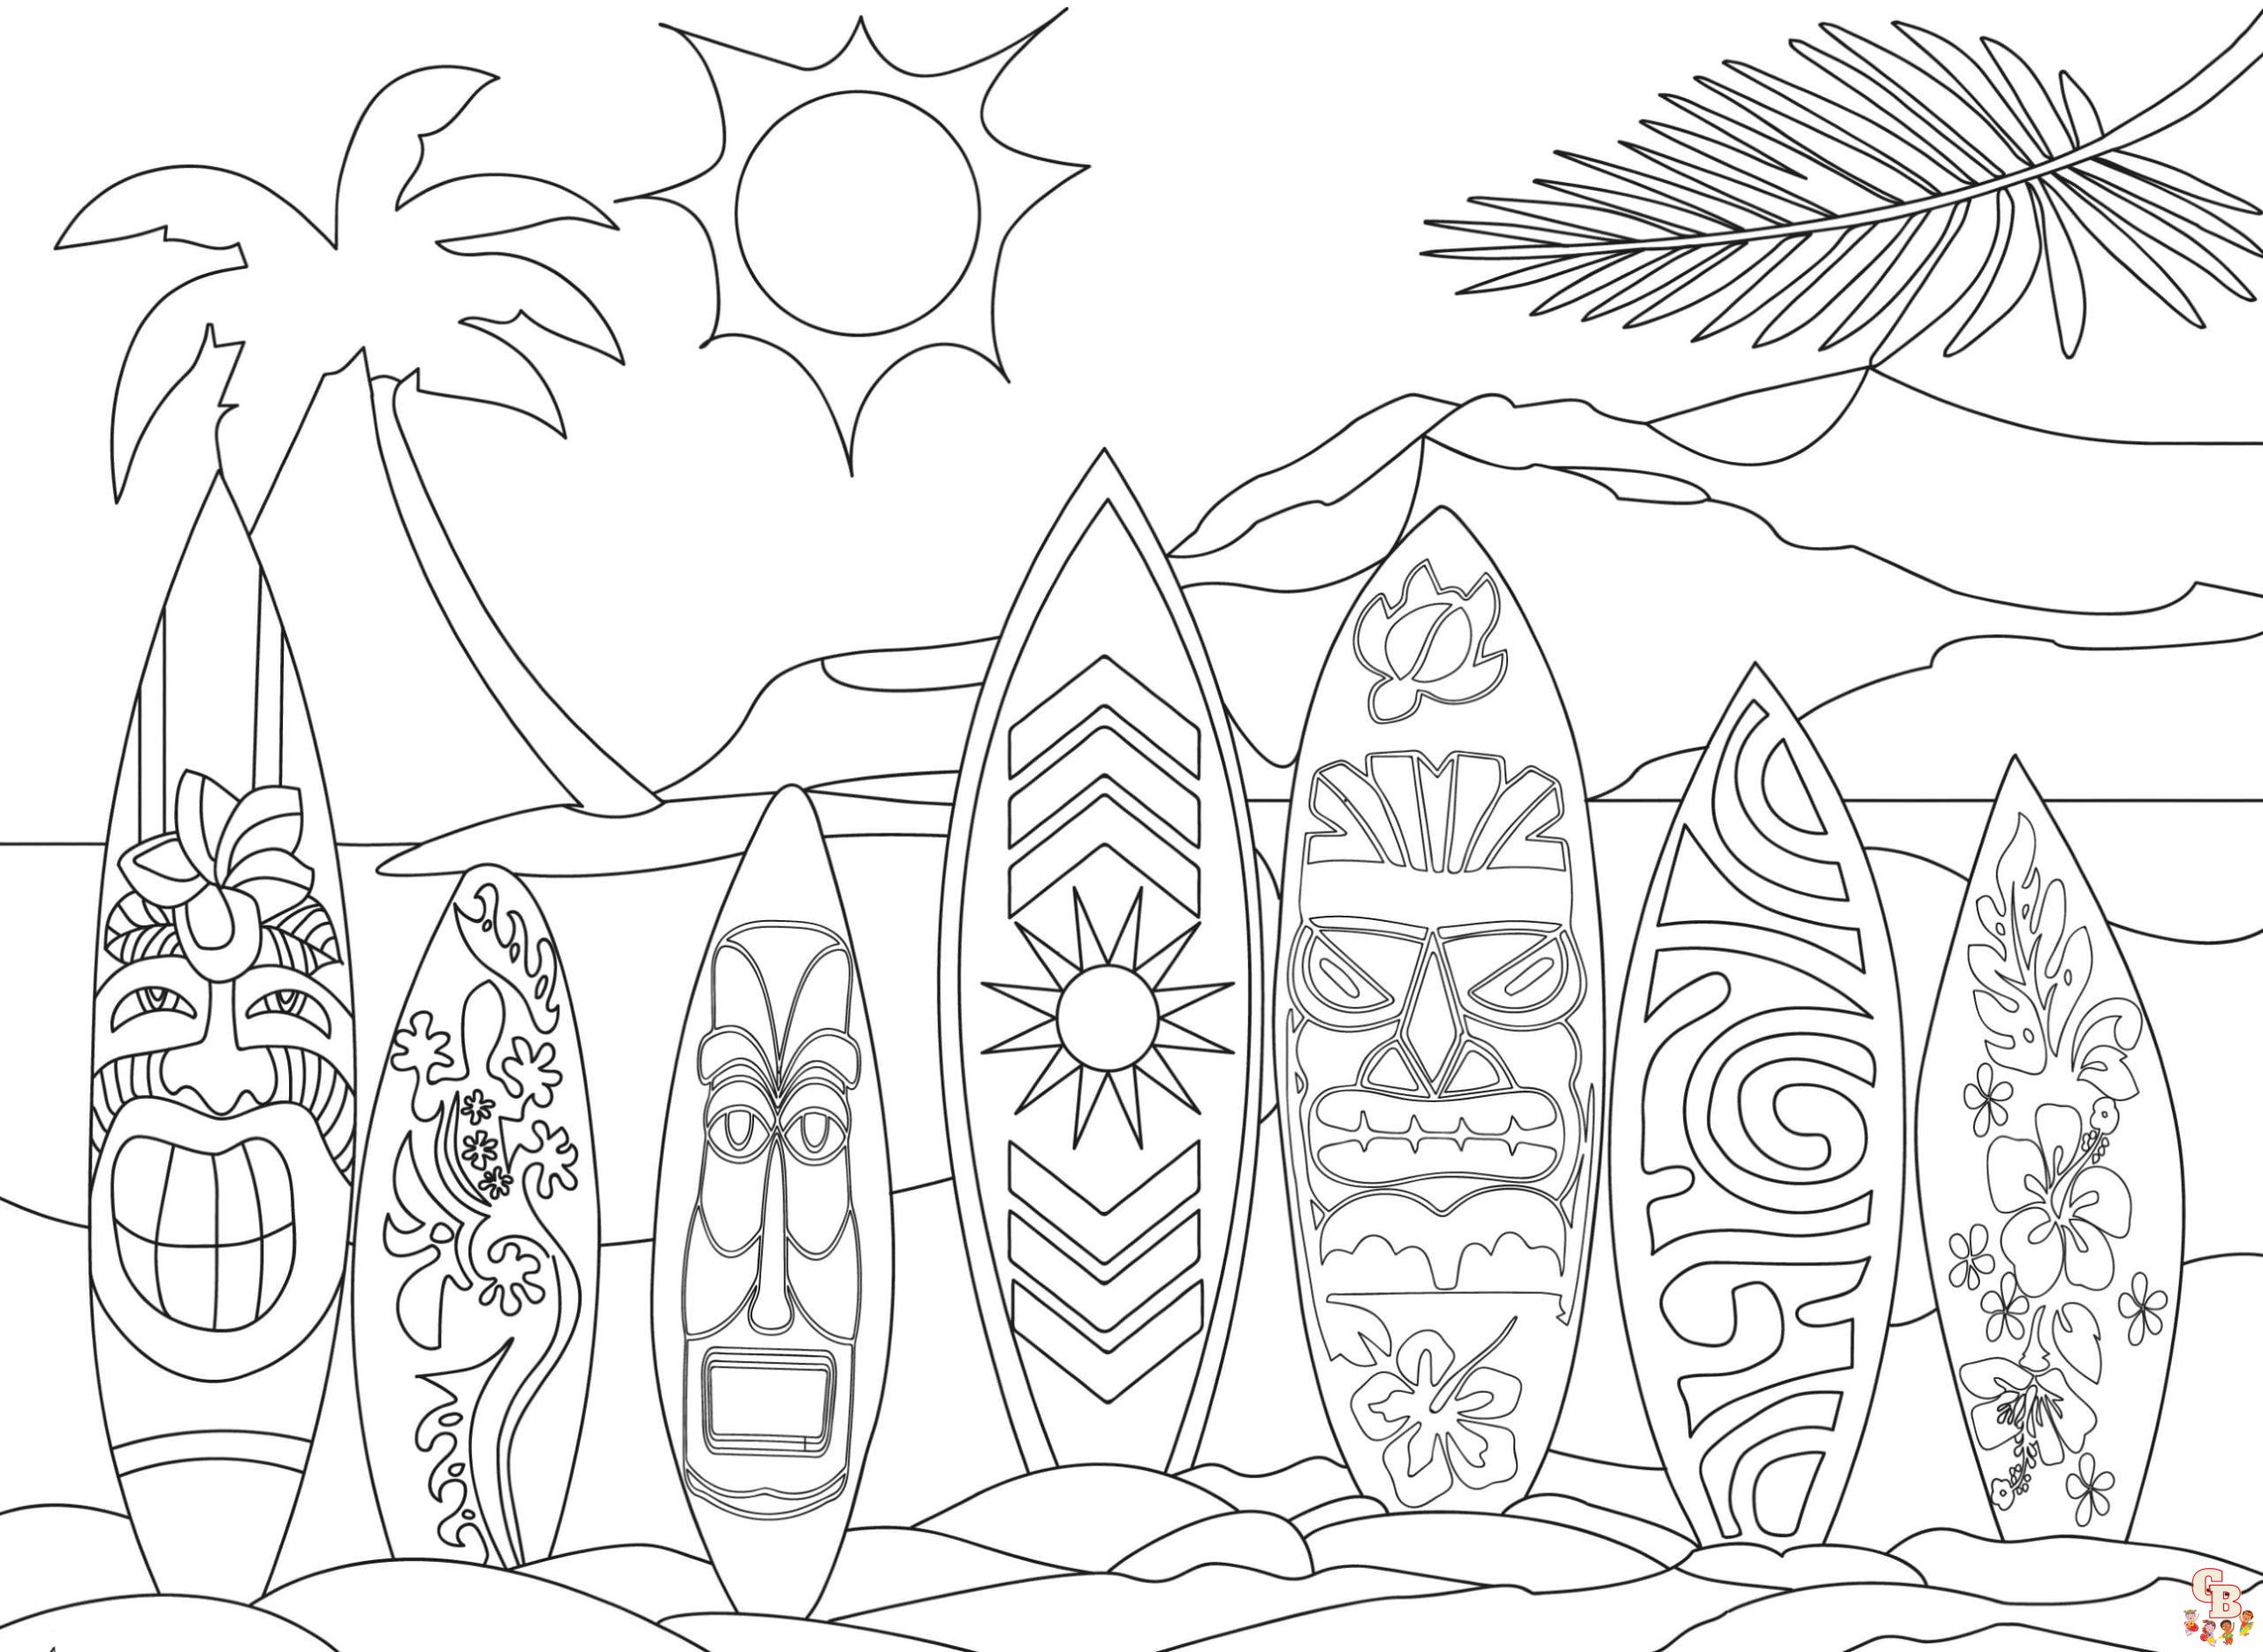 Printable haiwaii coloring pages free for kids and adults